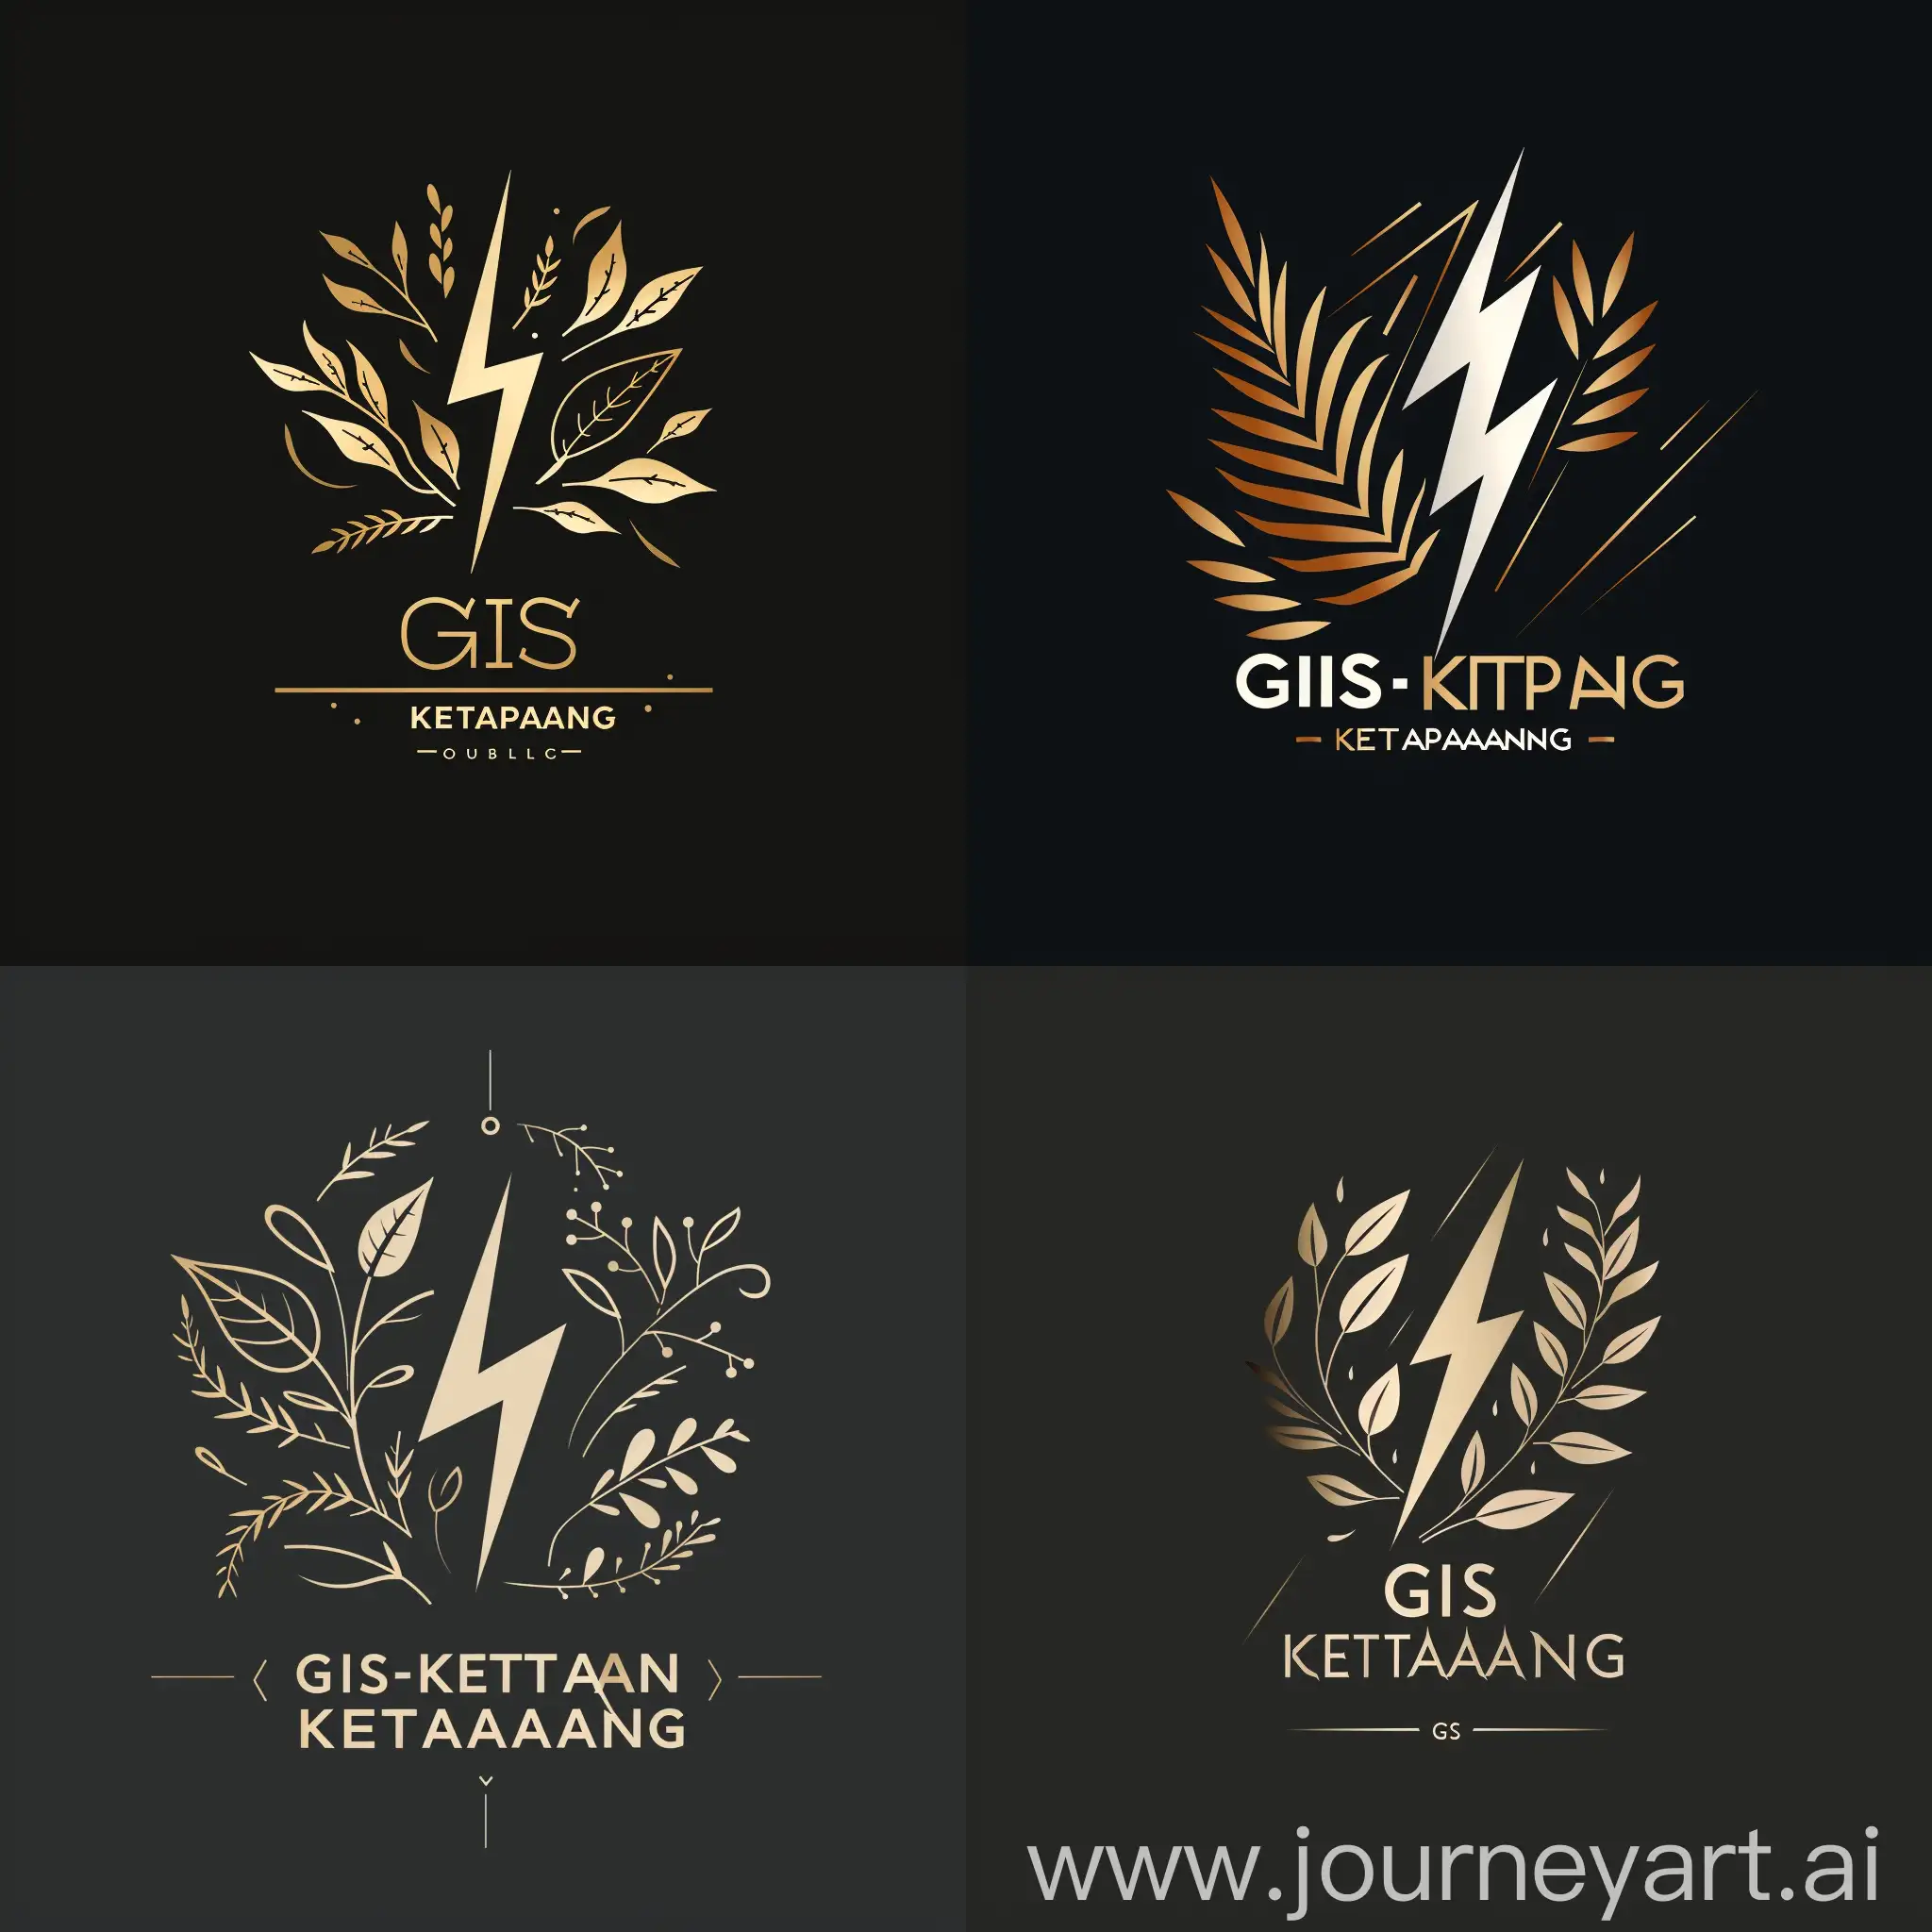 Generate a logo with clean lines and symbolic elements, seamlessly combining a lightning bolt, Ketapang tree leaves, and the text "GIS KETAPANG." Ensure that the logo exudes dynamic elegance while maintaining brand integrity and recognition. Strive for a design that is visually striking and exquisitely refined.